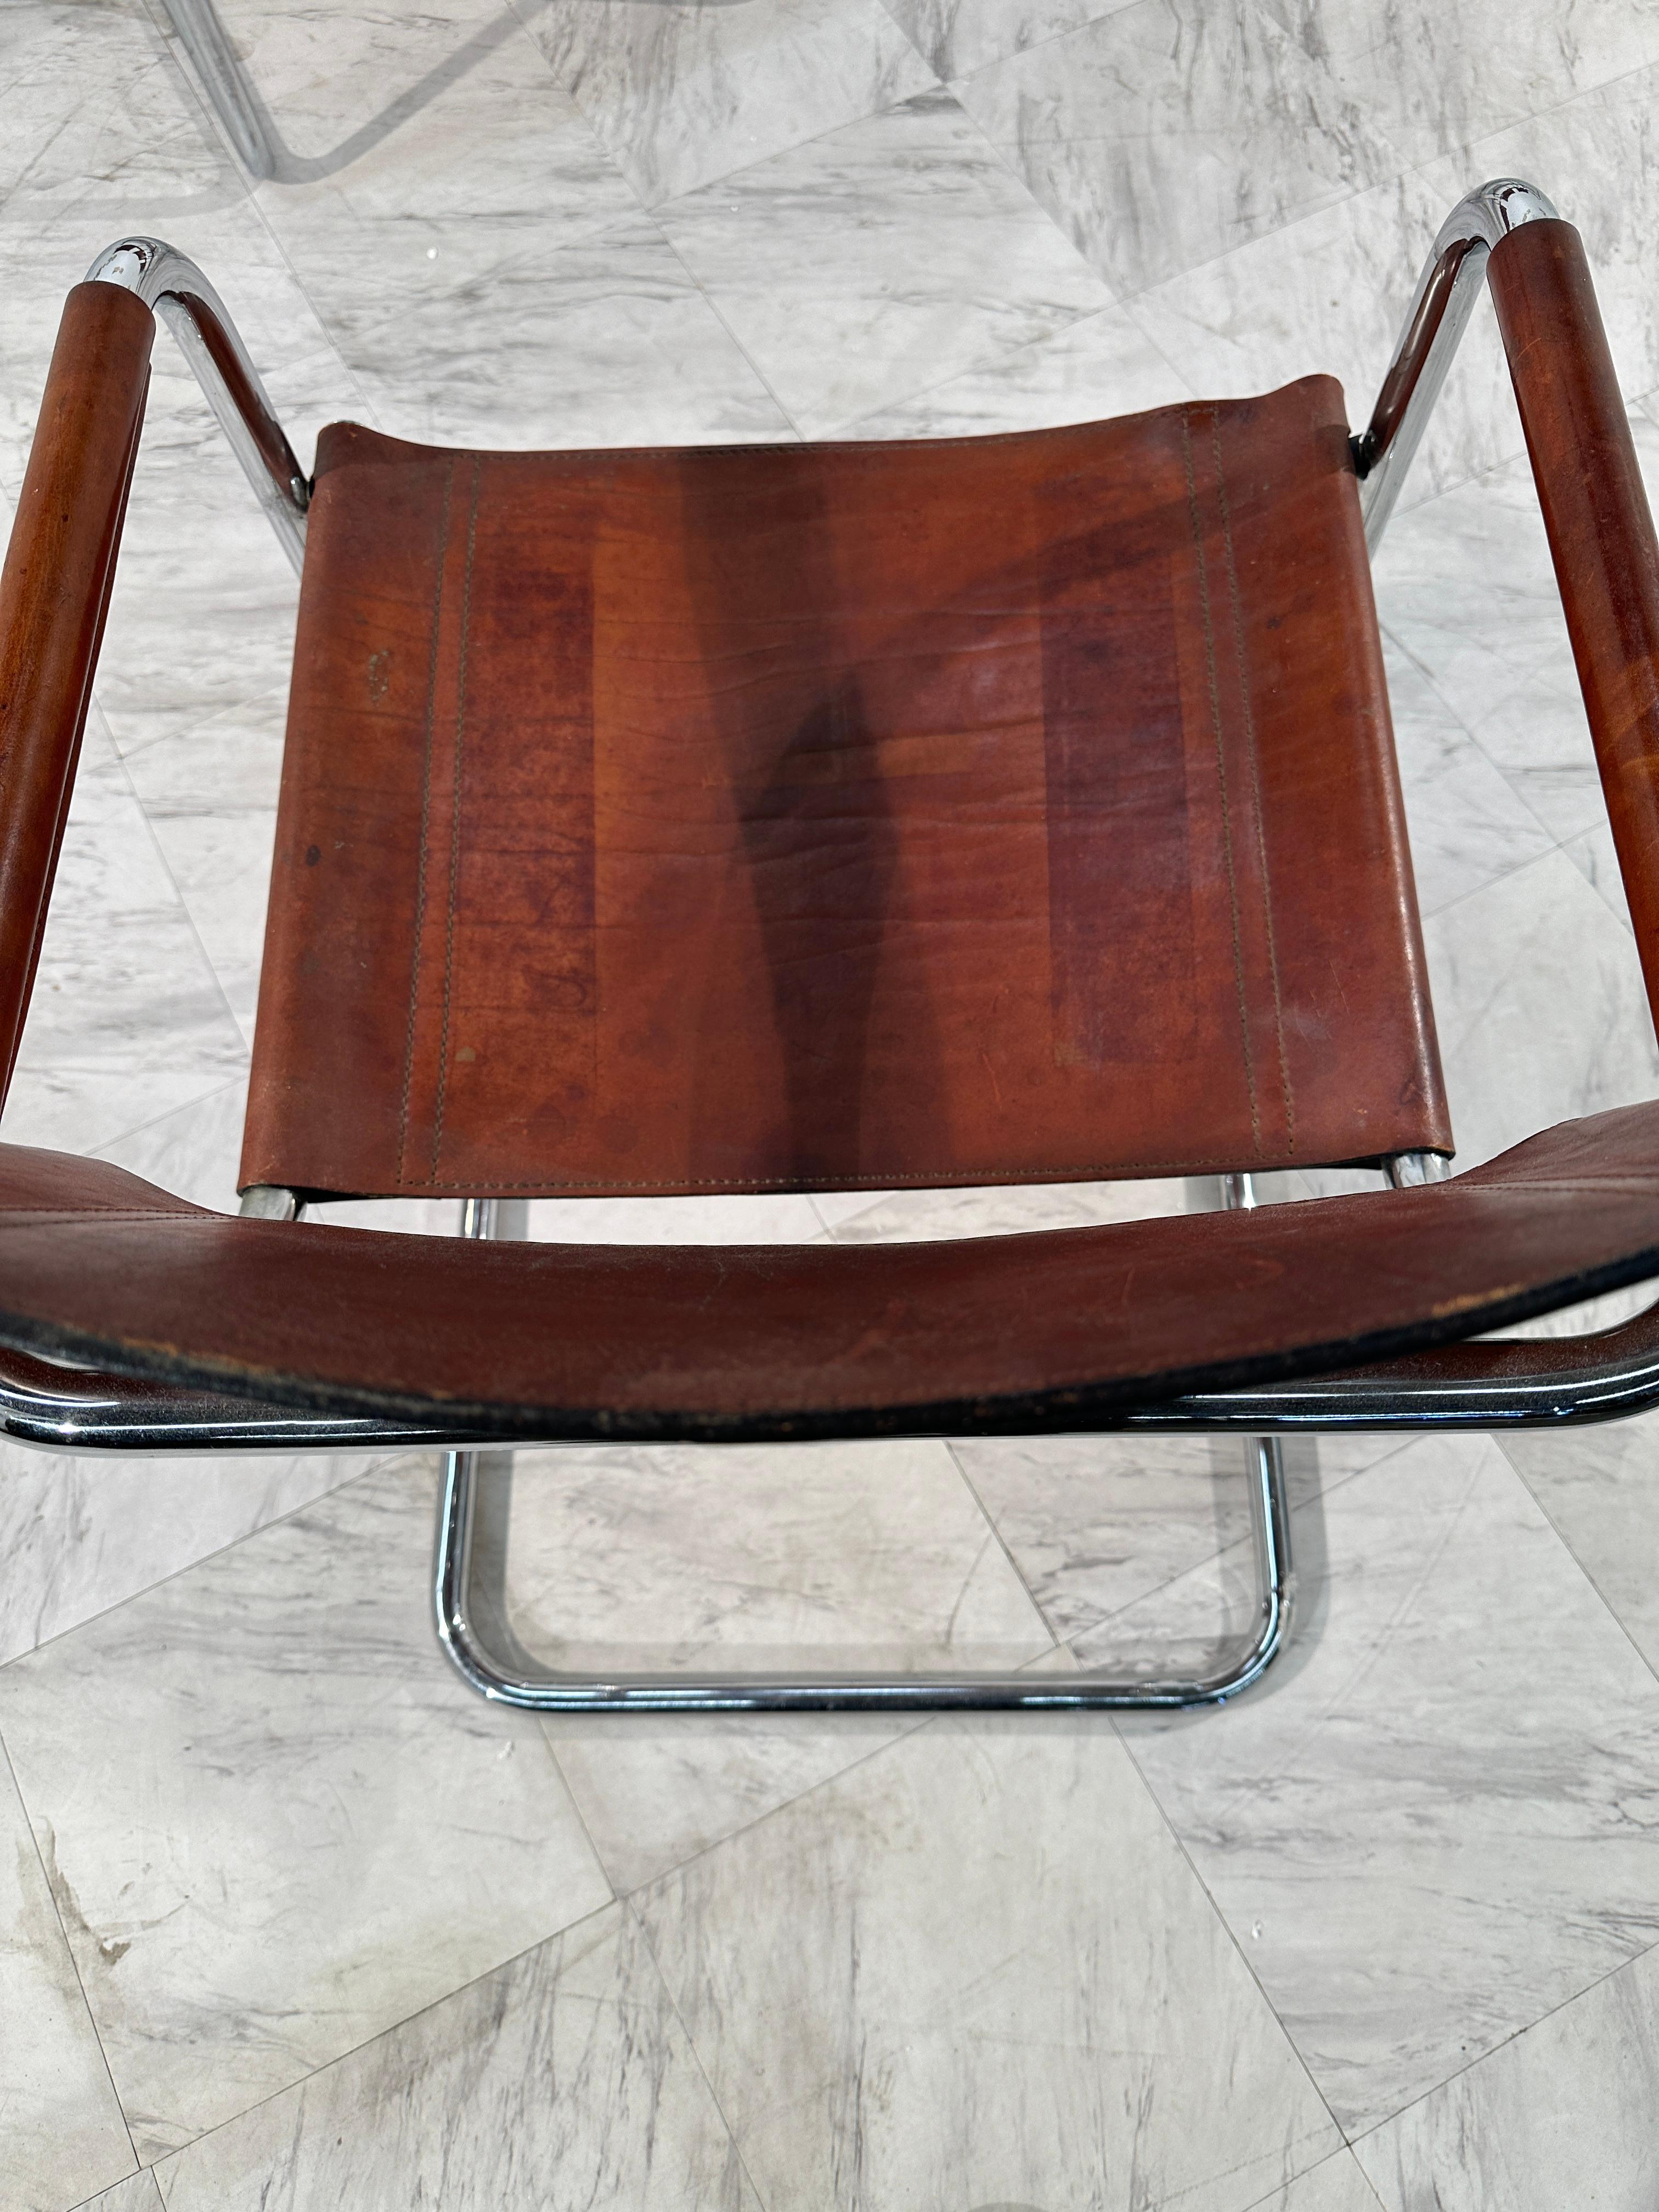 Vintage S34 Armchairs by Mart Stam & Marcel Breuer for Thonet, 1950s In Good Condition For Sale In Los Angeles, CA